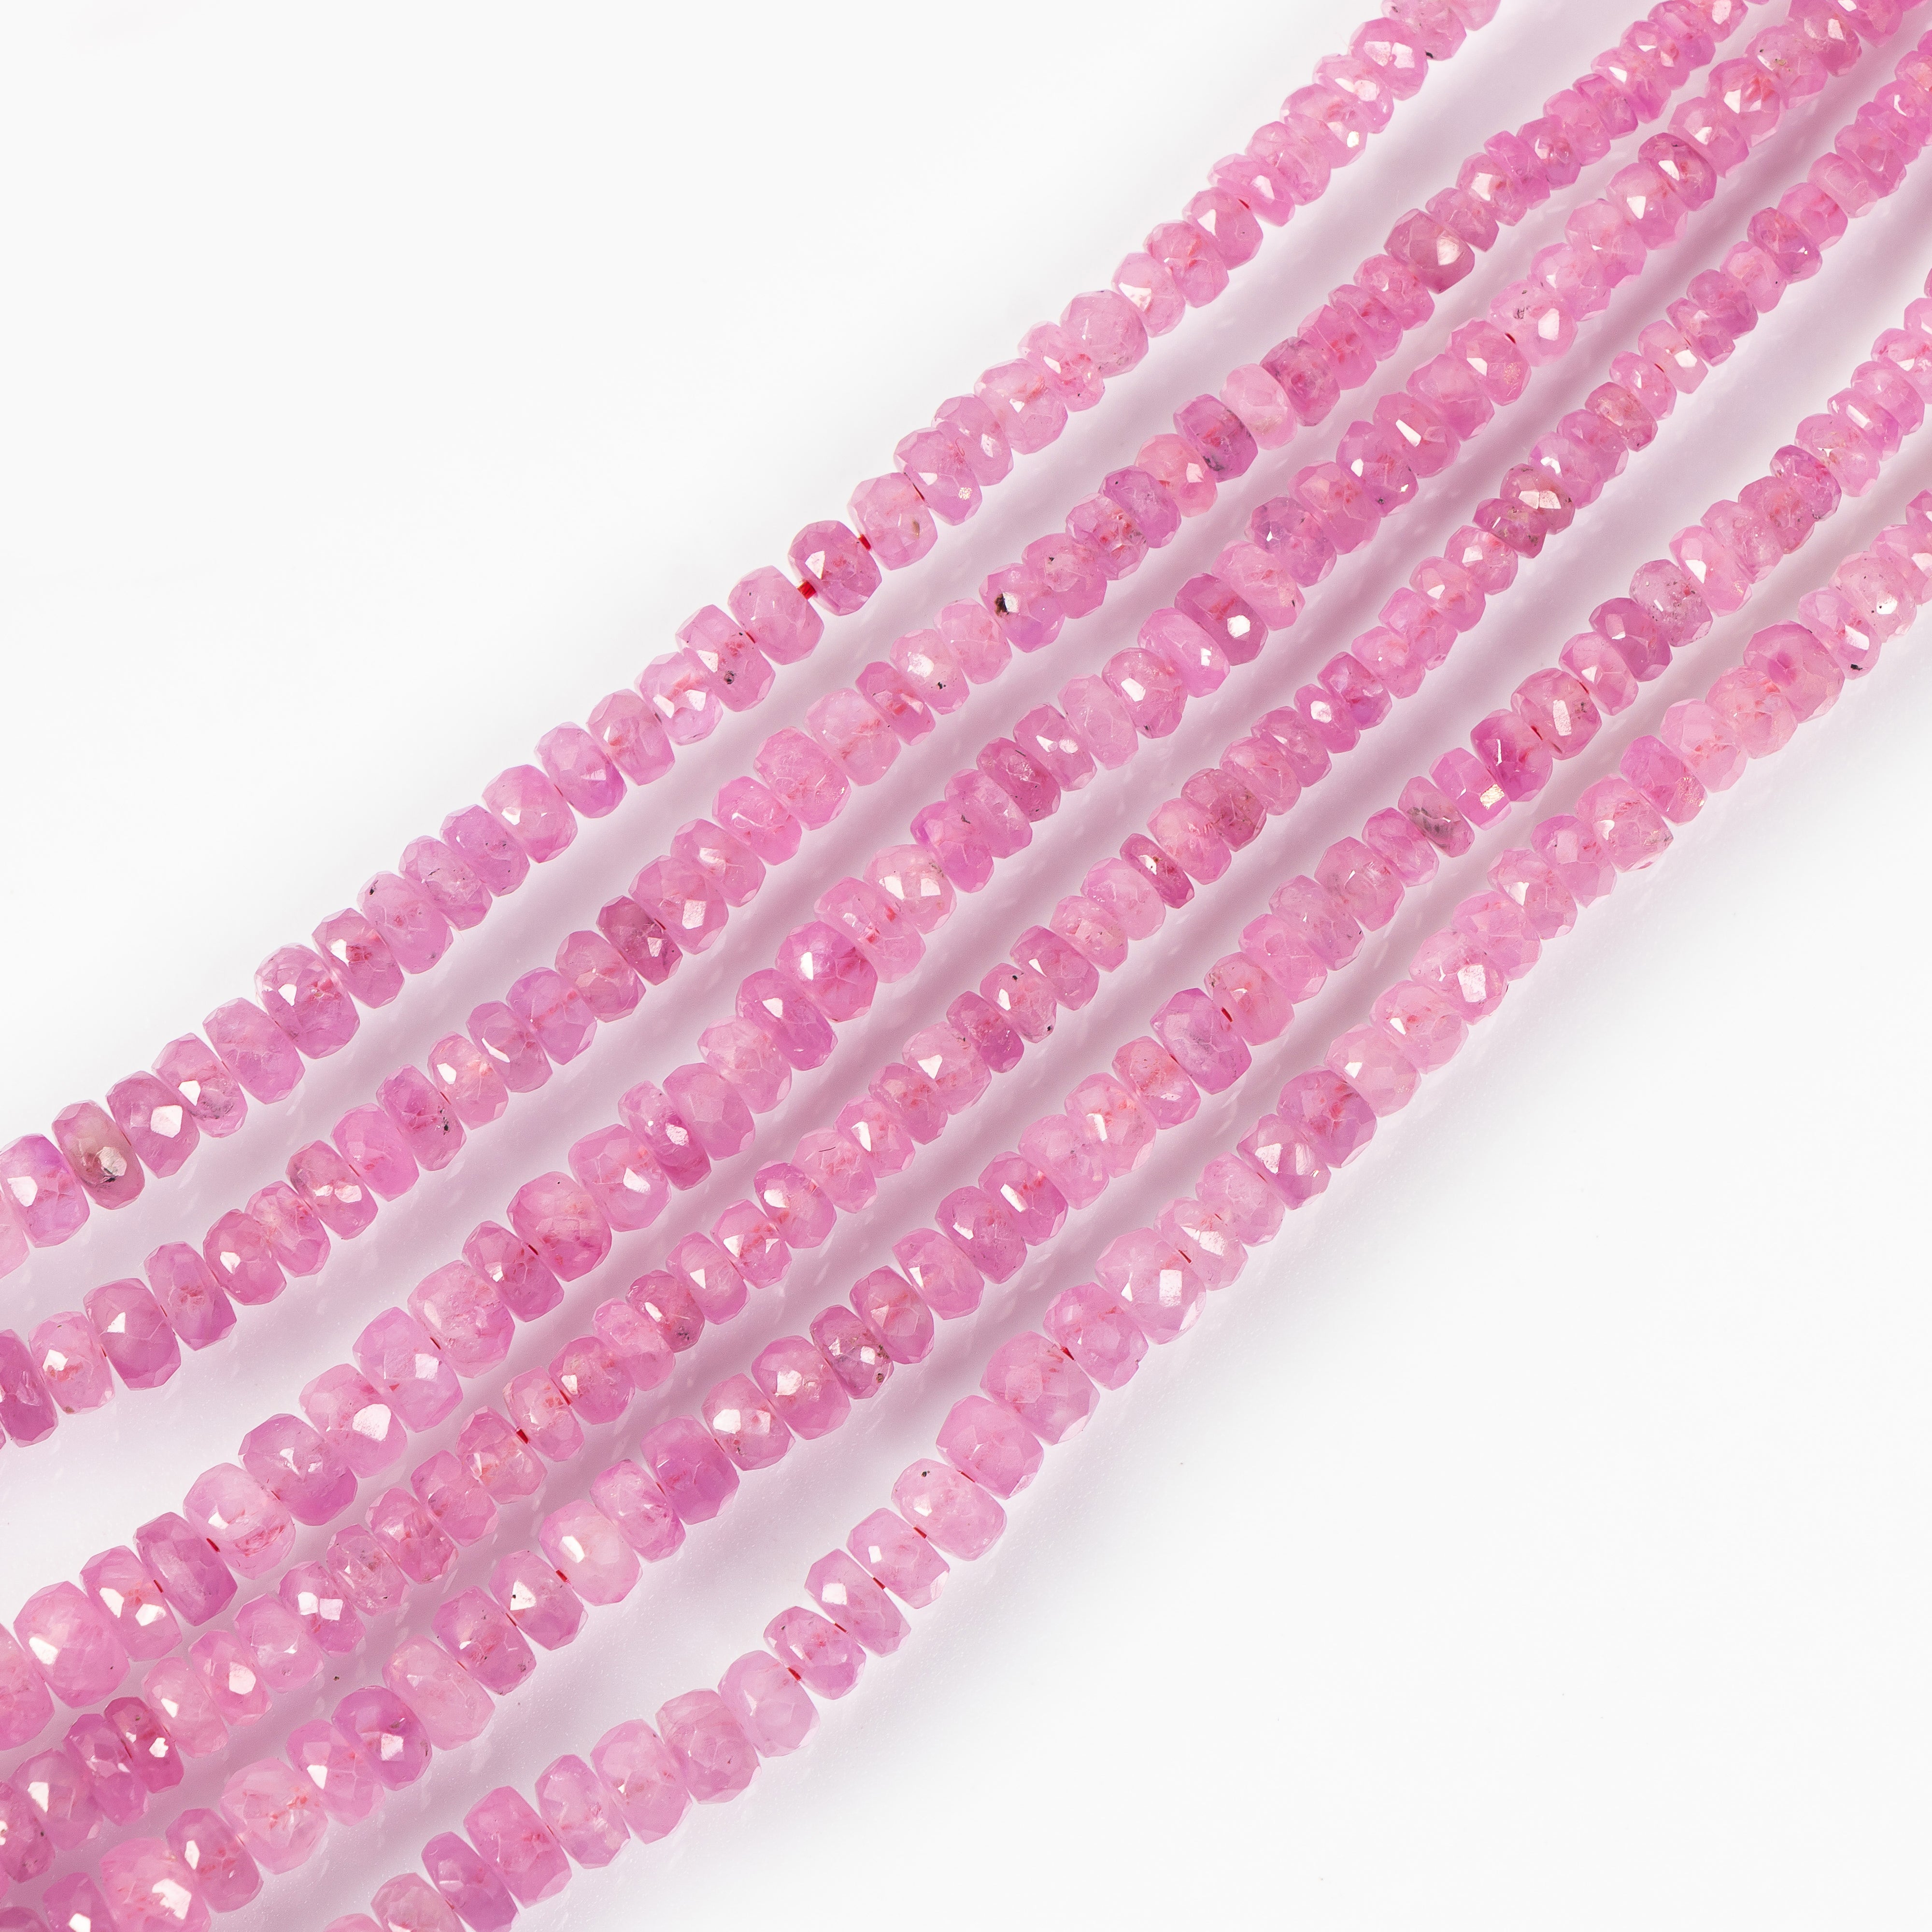 3-6MM Burma Ruby Faceted Rondelle Shape Gemstone Beads TGS-4277